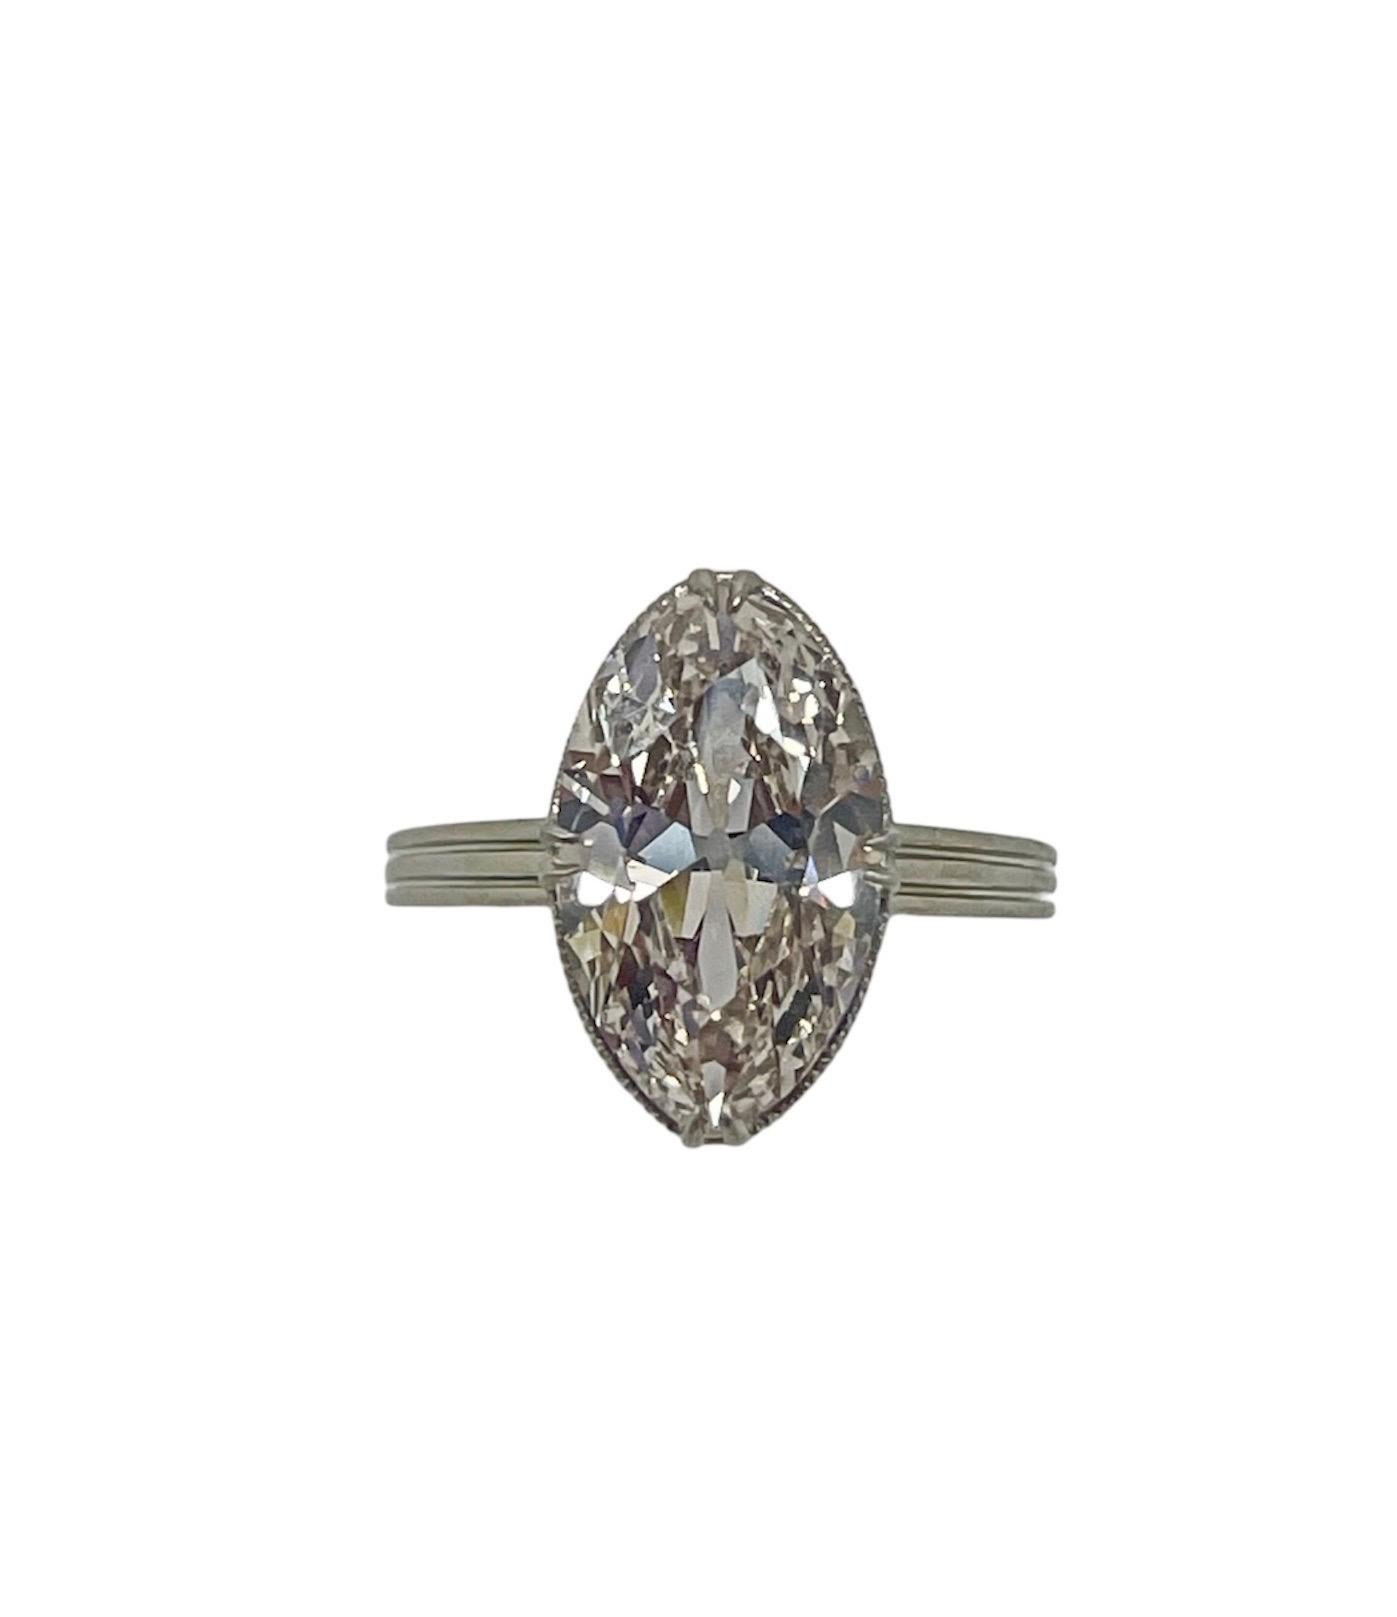 This unique and beautifully hand crafted ring by influential New York Jeweler Theodore B. Starr, displays an antique marquise cut diamond weighing 2.95 carats with a hidden halo made up of old cut diamonds. Mounted in platinum with delicate claw